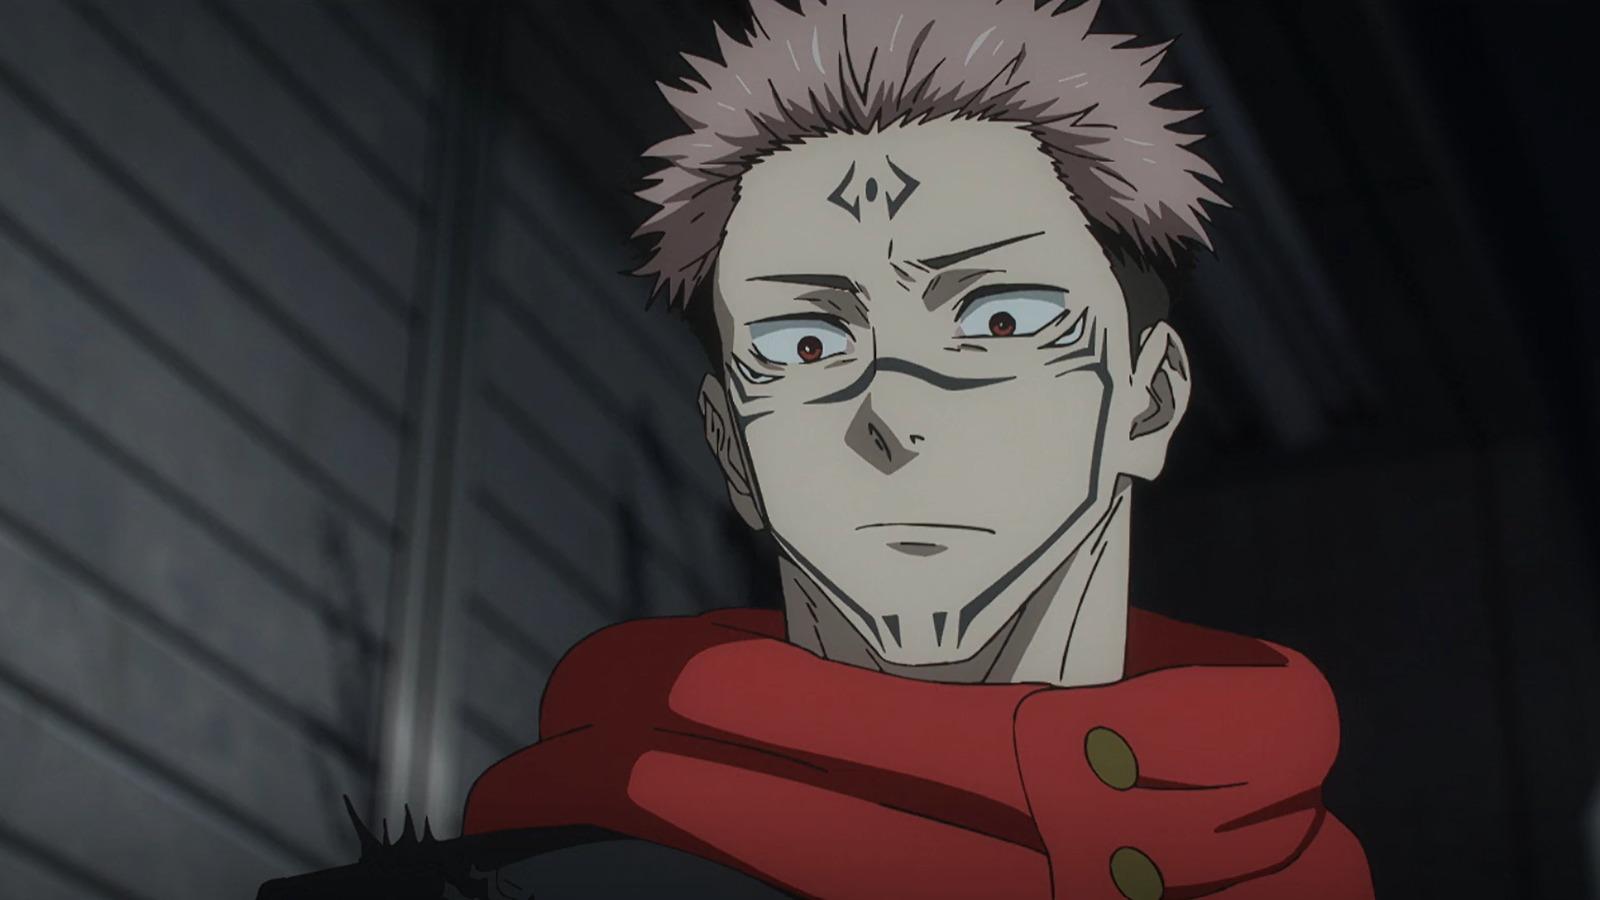 Jujutsu Kaisen Season 2's New Opening and Ending Animations Released